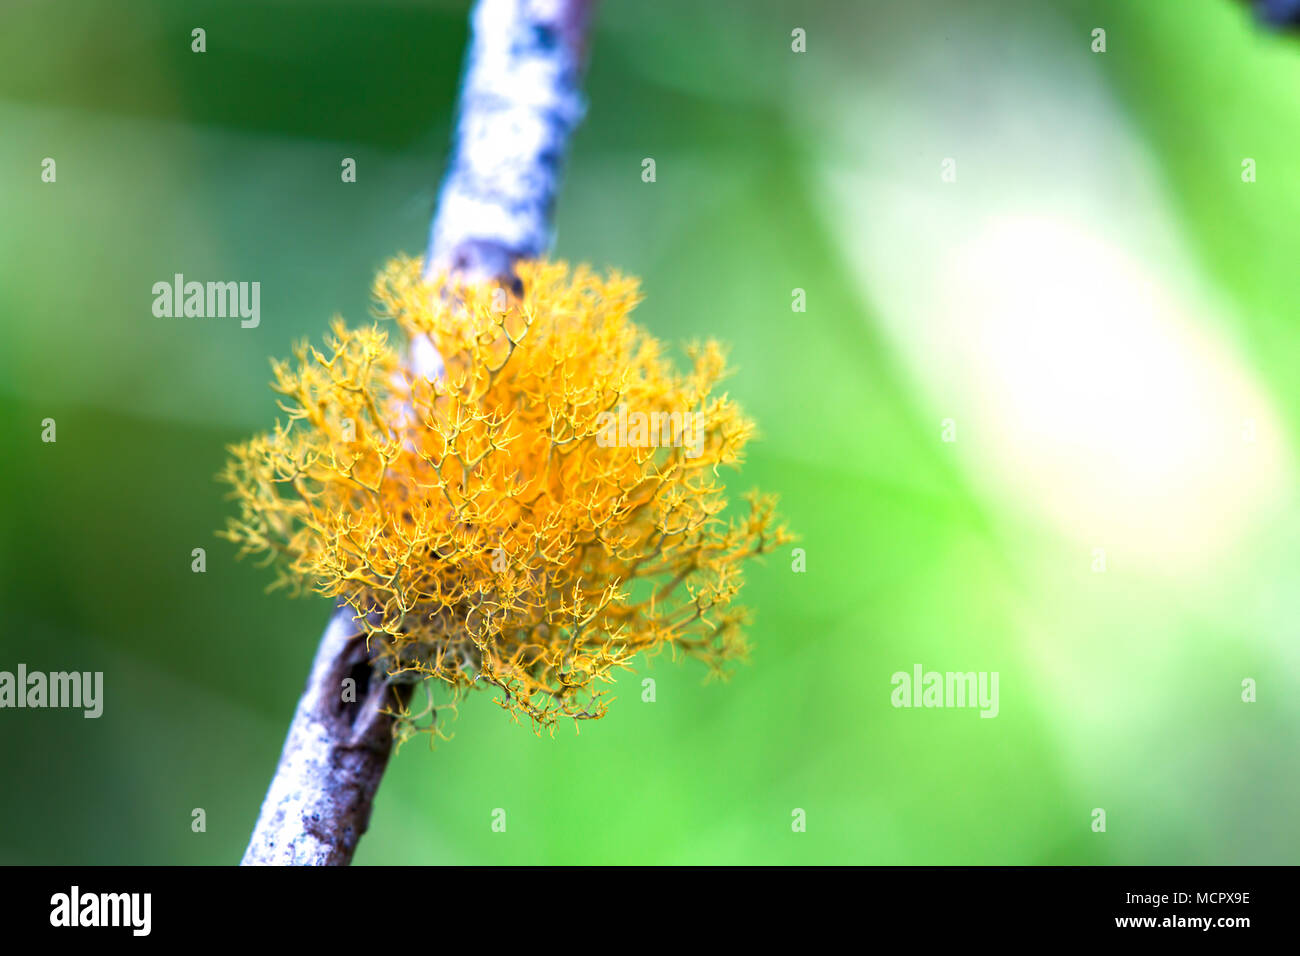 Macro photography of Letharia vulpina lichen growing in a branch. Stock Photo